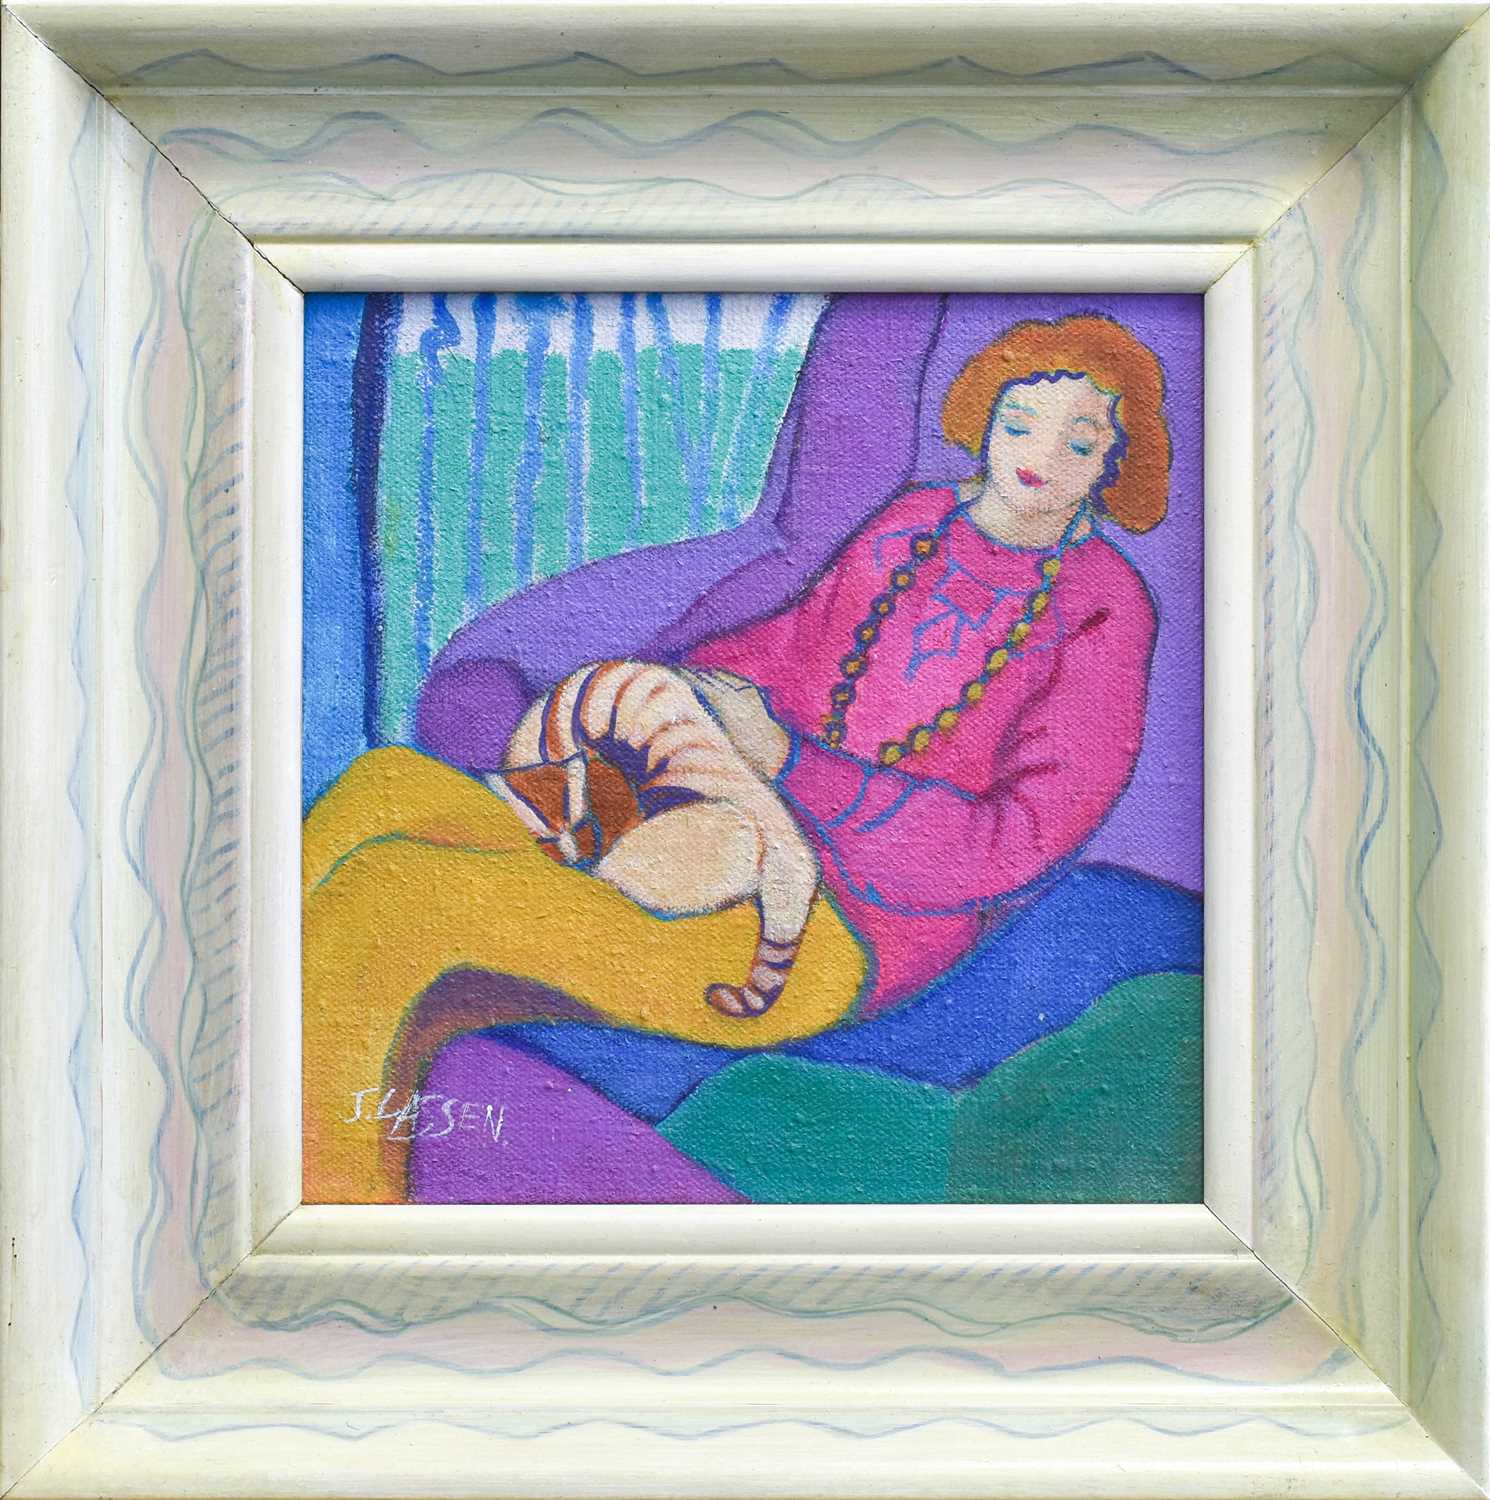 Jeanette Lasson (1924-2008) "Sleeping Partners" Signed, signed, inscribed and dated 1993 verso, - Image 2 of 2